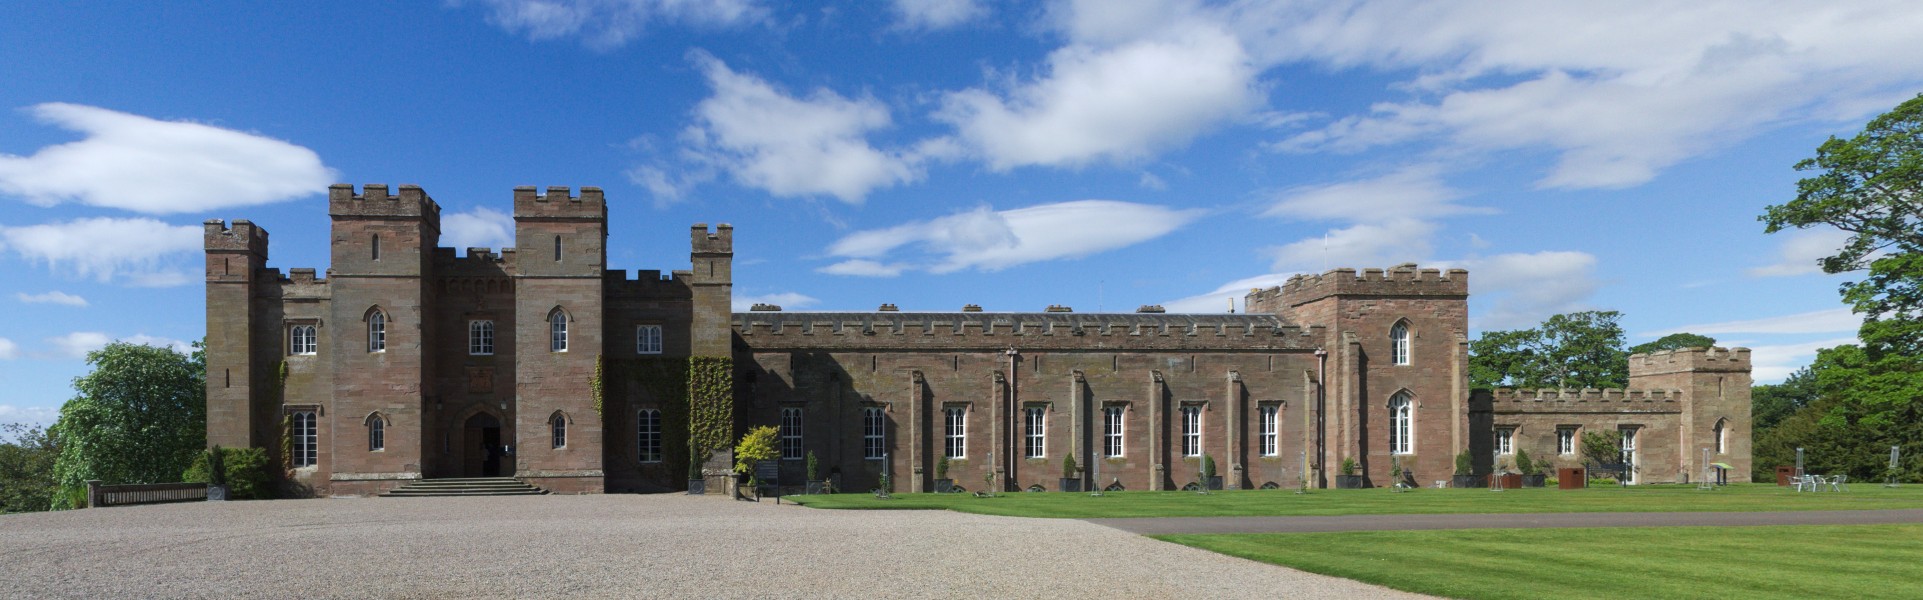 Scone Palace - Front side